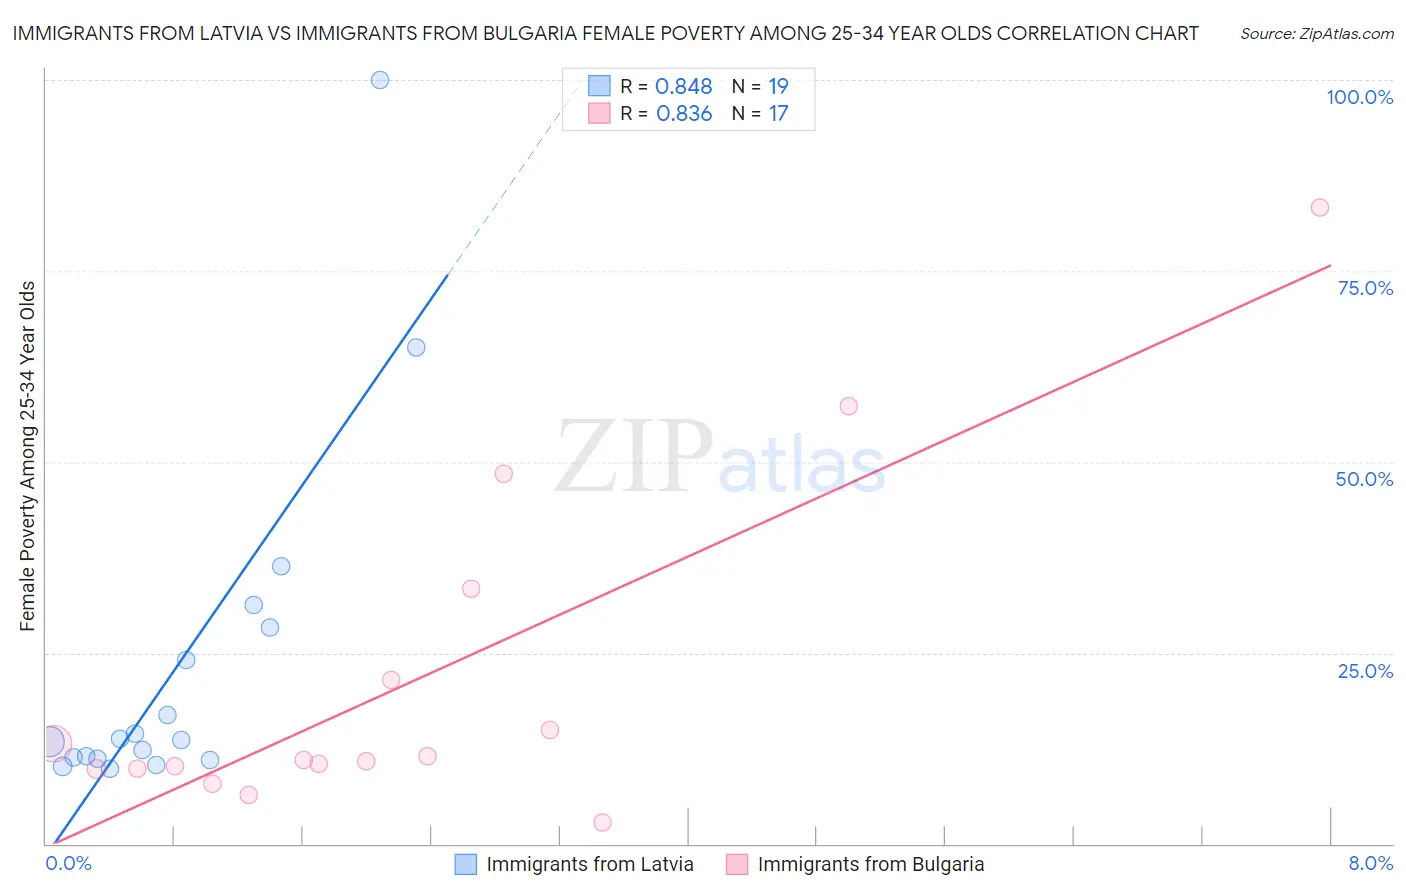 Immigrants from Latvia vs Immigrants from Bulgaria Female Poverty Among 25-34 Year Olds